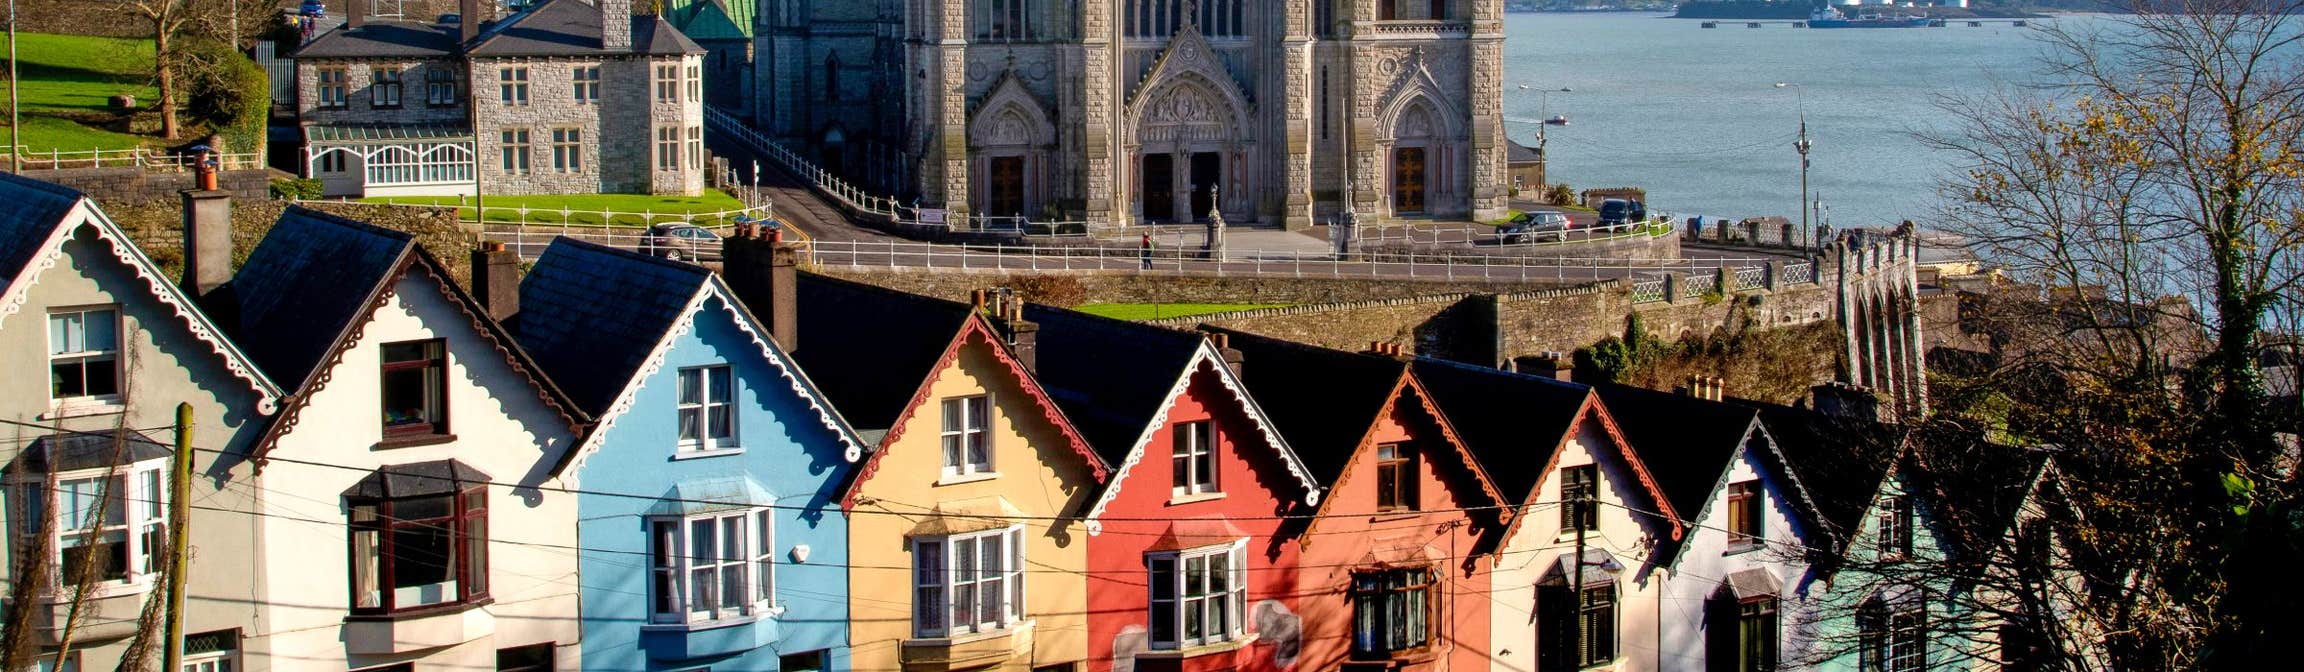 Colourful houses in front of Cobh Cathedral, County Cork